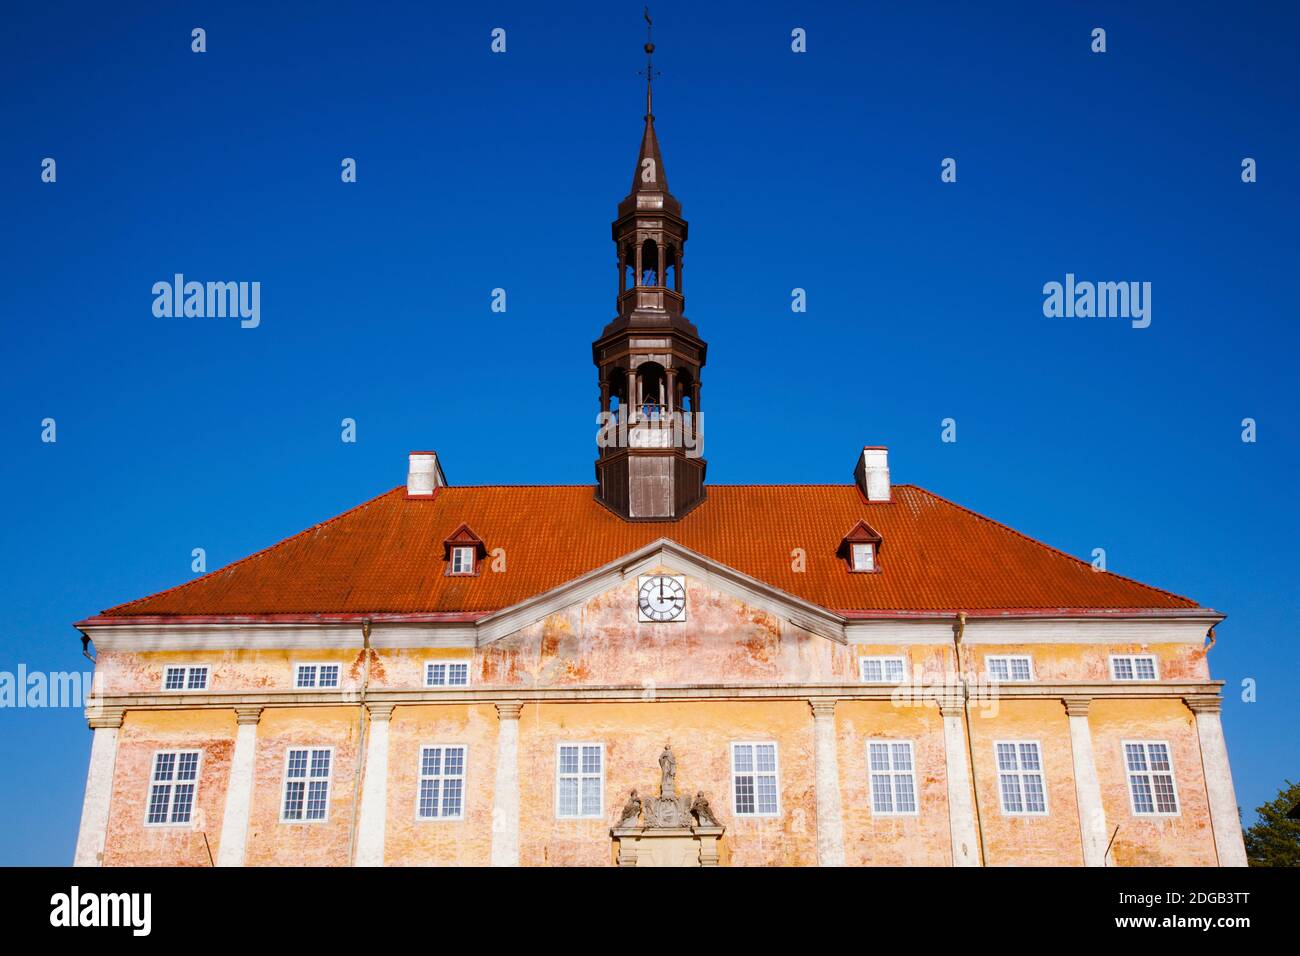 Low angle view of a Town Hall, Narva, Estonia Stock Photo